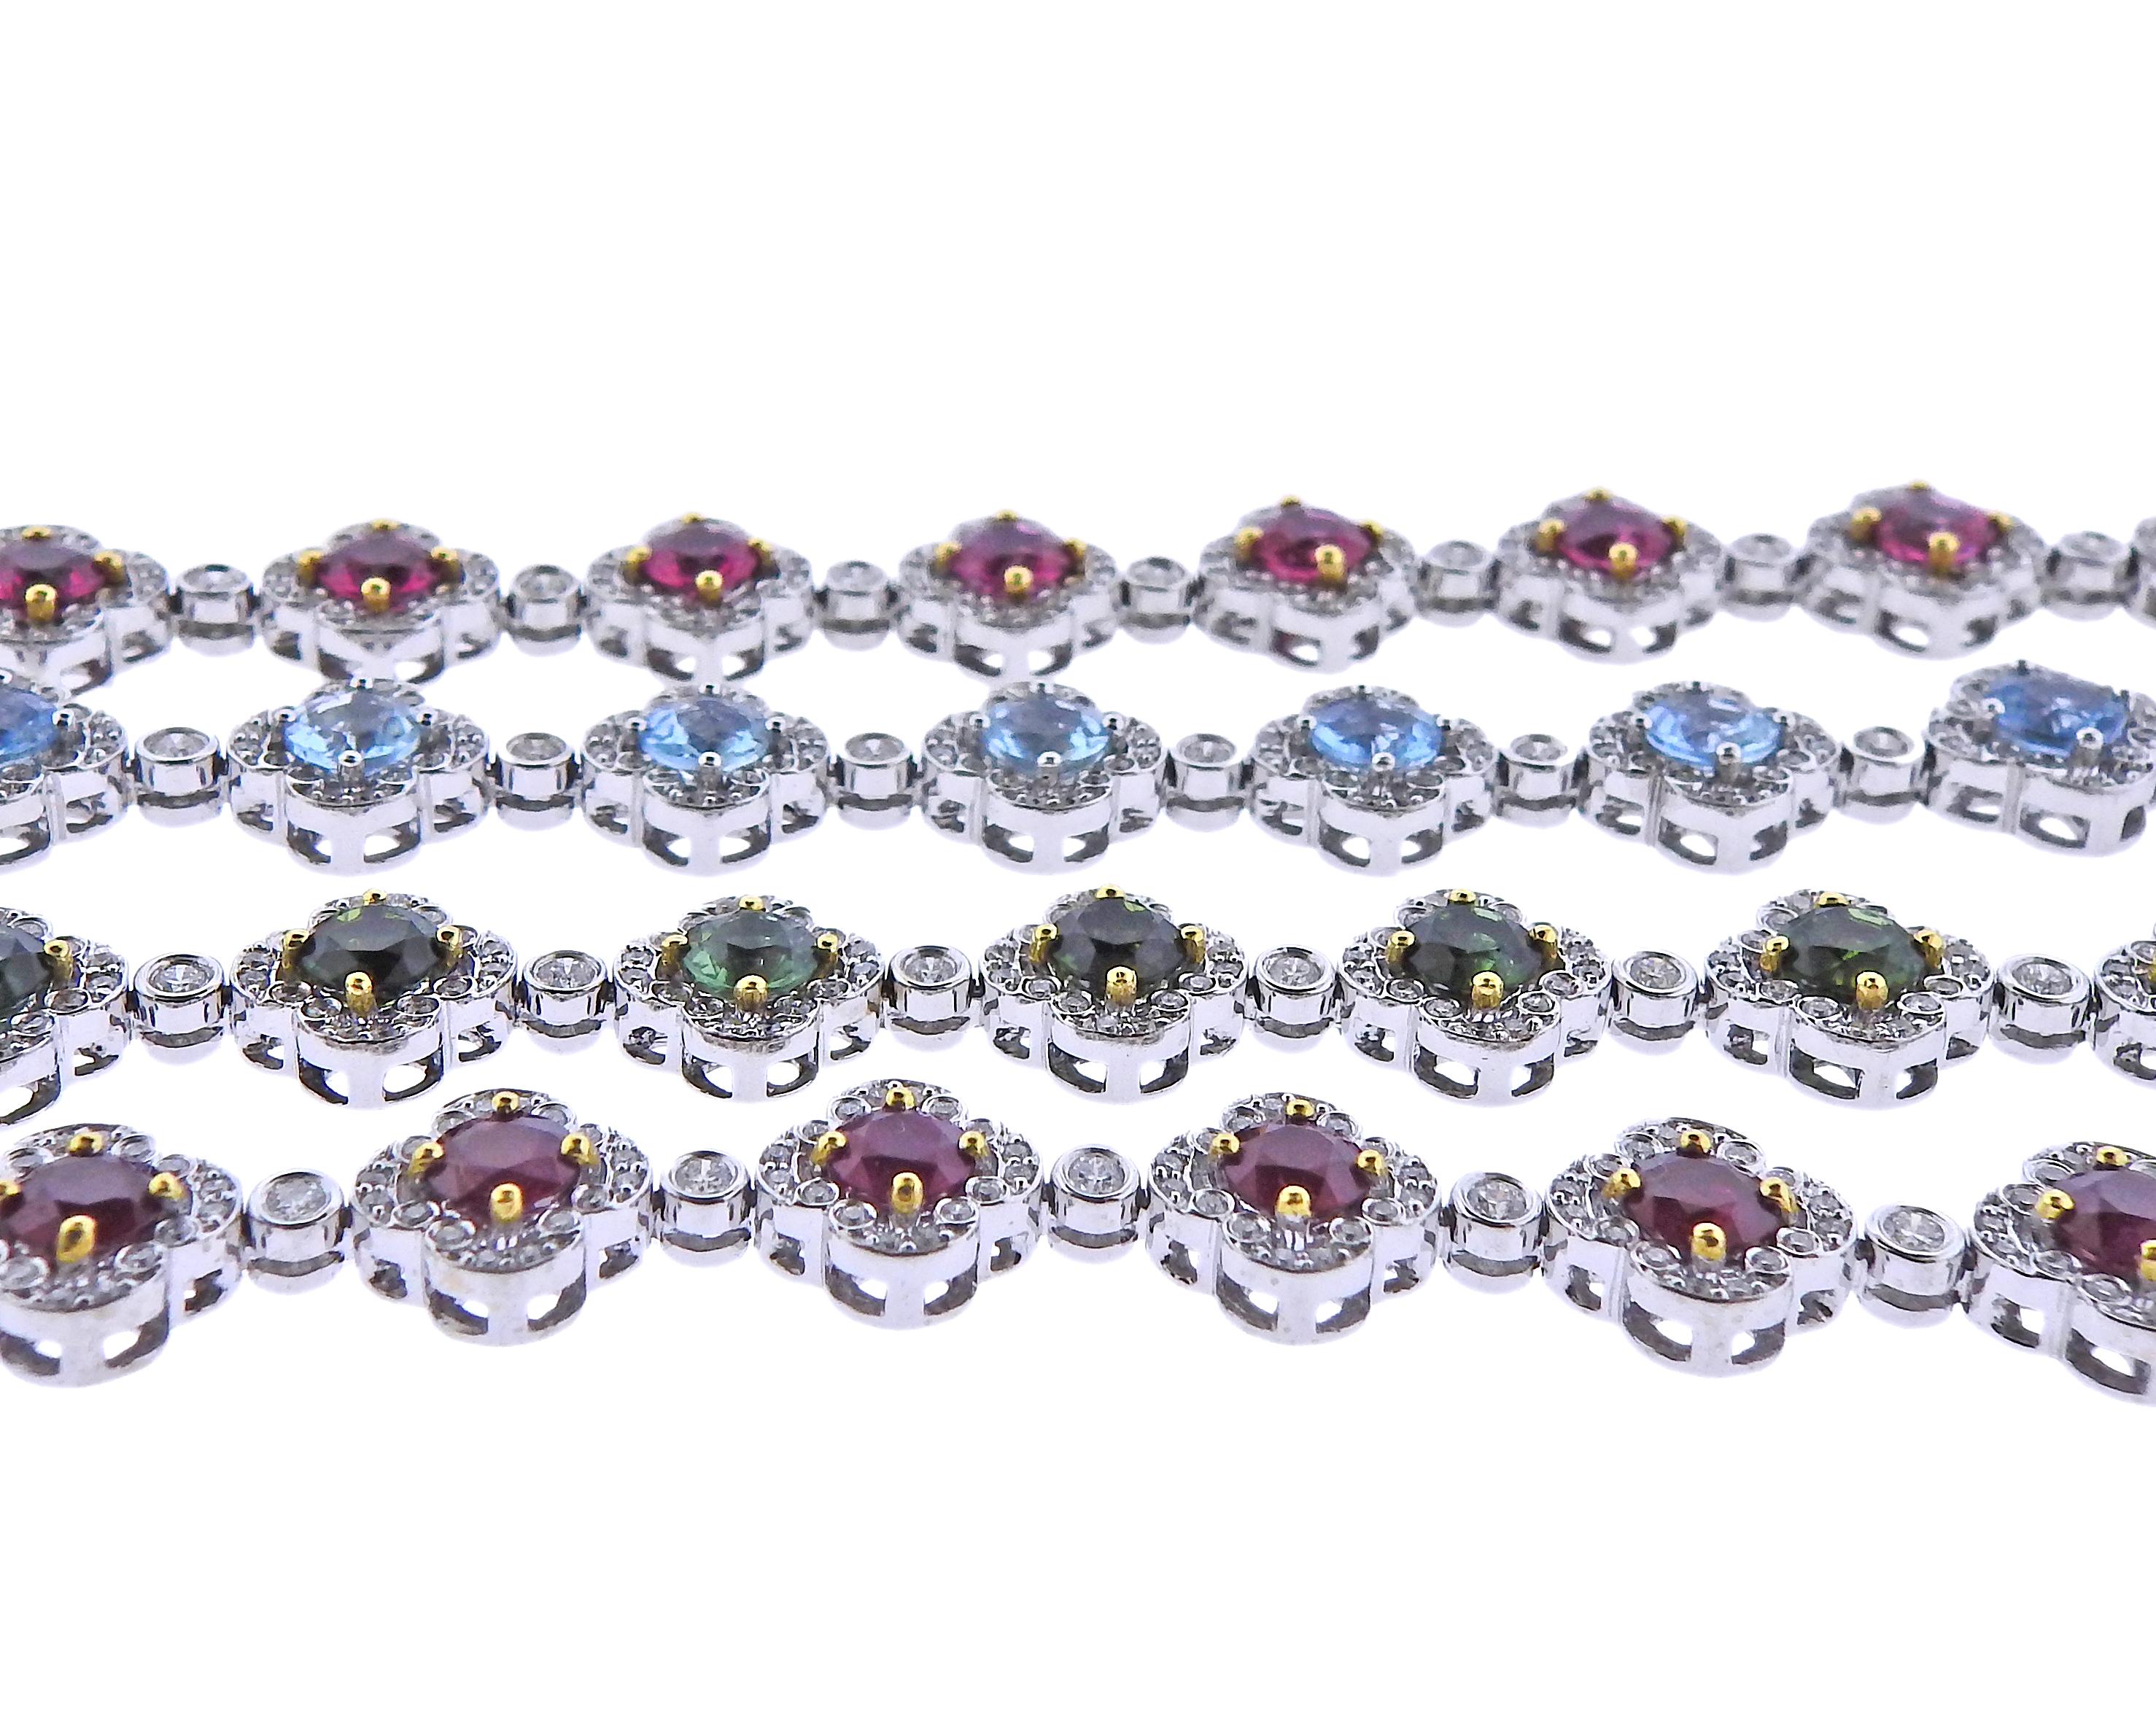 Set of 4 18k white gold bracelets by Charles Krypell, set with aquamarines, green tourmalines, rubies and a total of approx. 5.80ctw in diamonds. Bracelets are 7.25